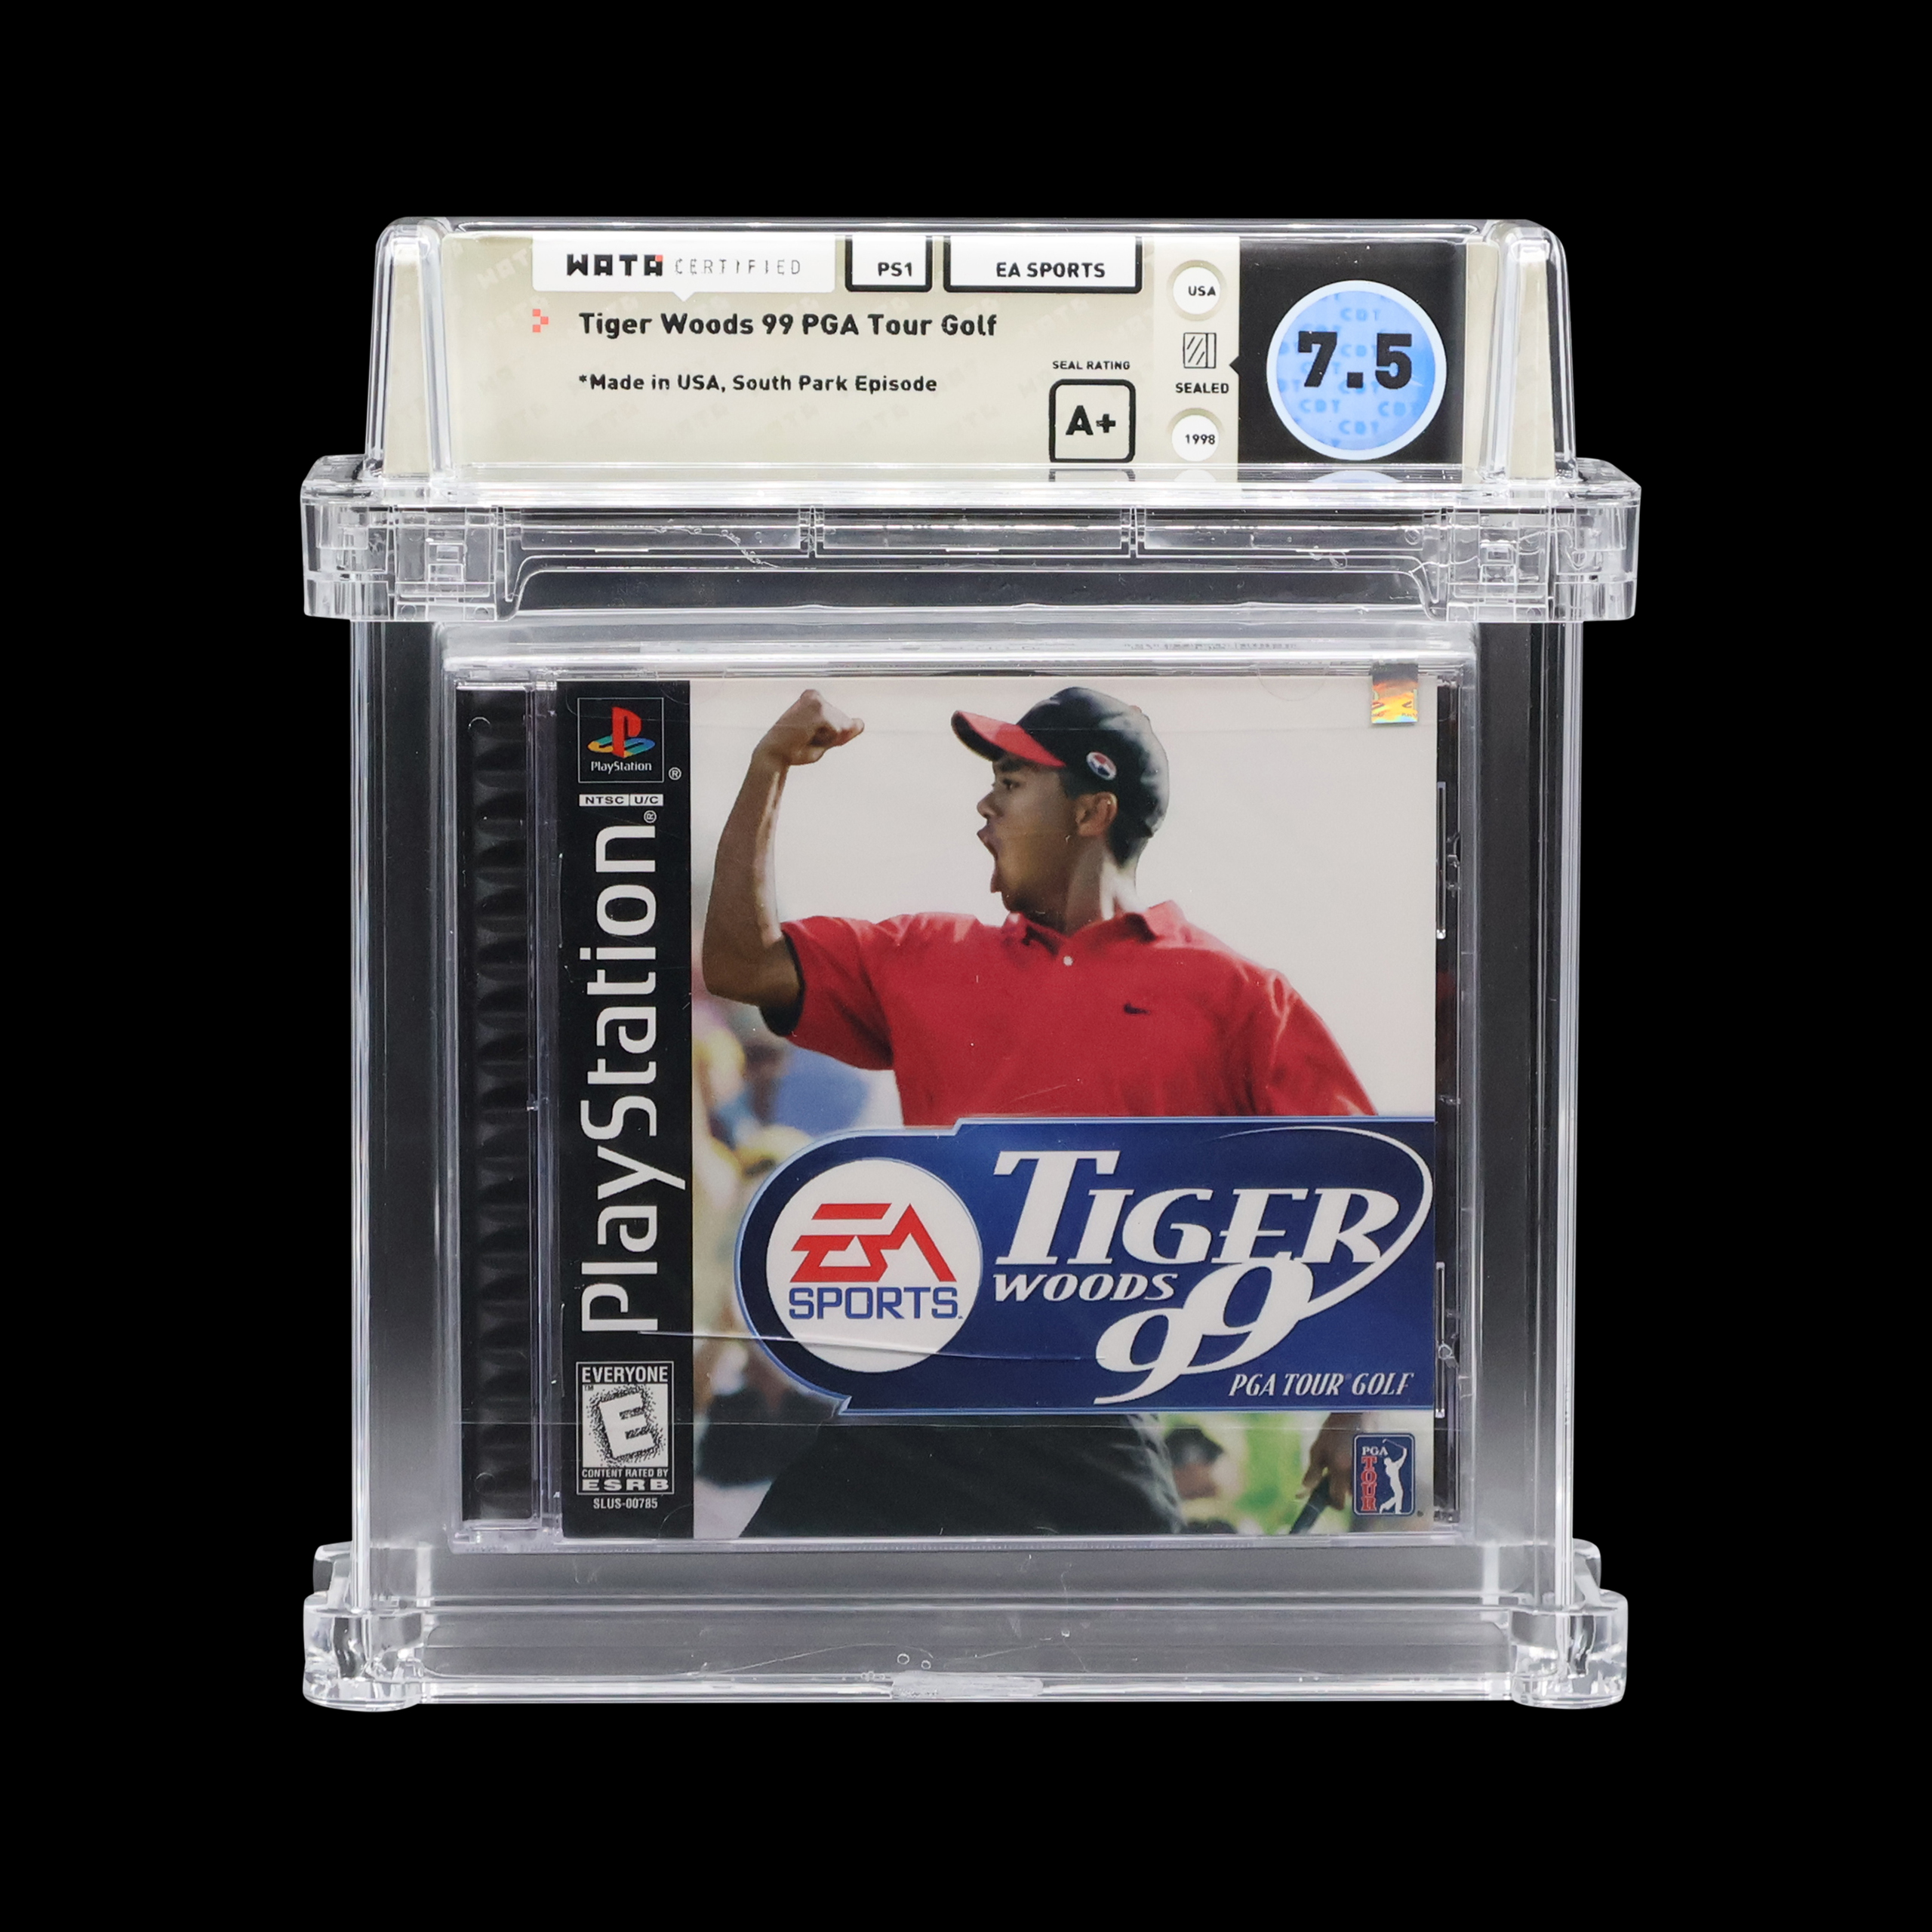 Graded Tiger Woods 99 PGA Tour PlayStation game with WATA 7.5 rating and A+ seal.